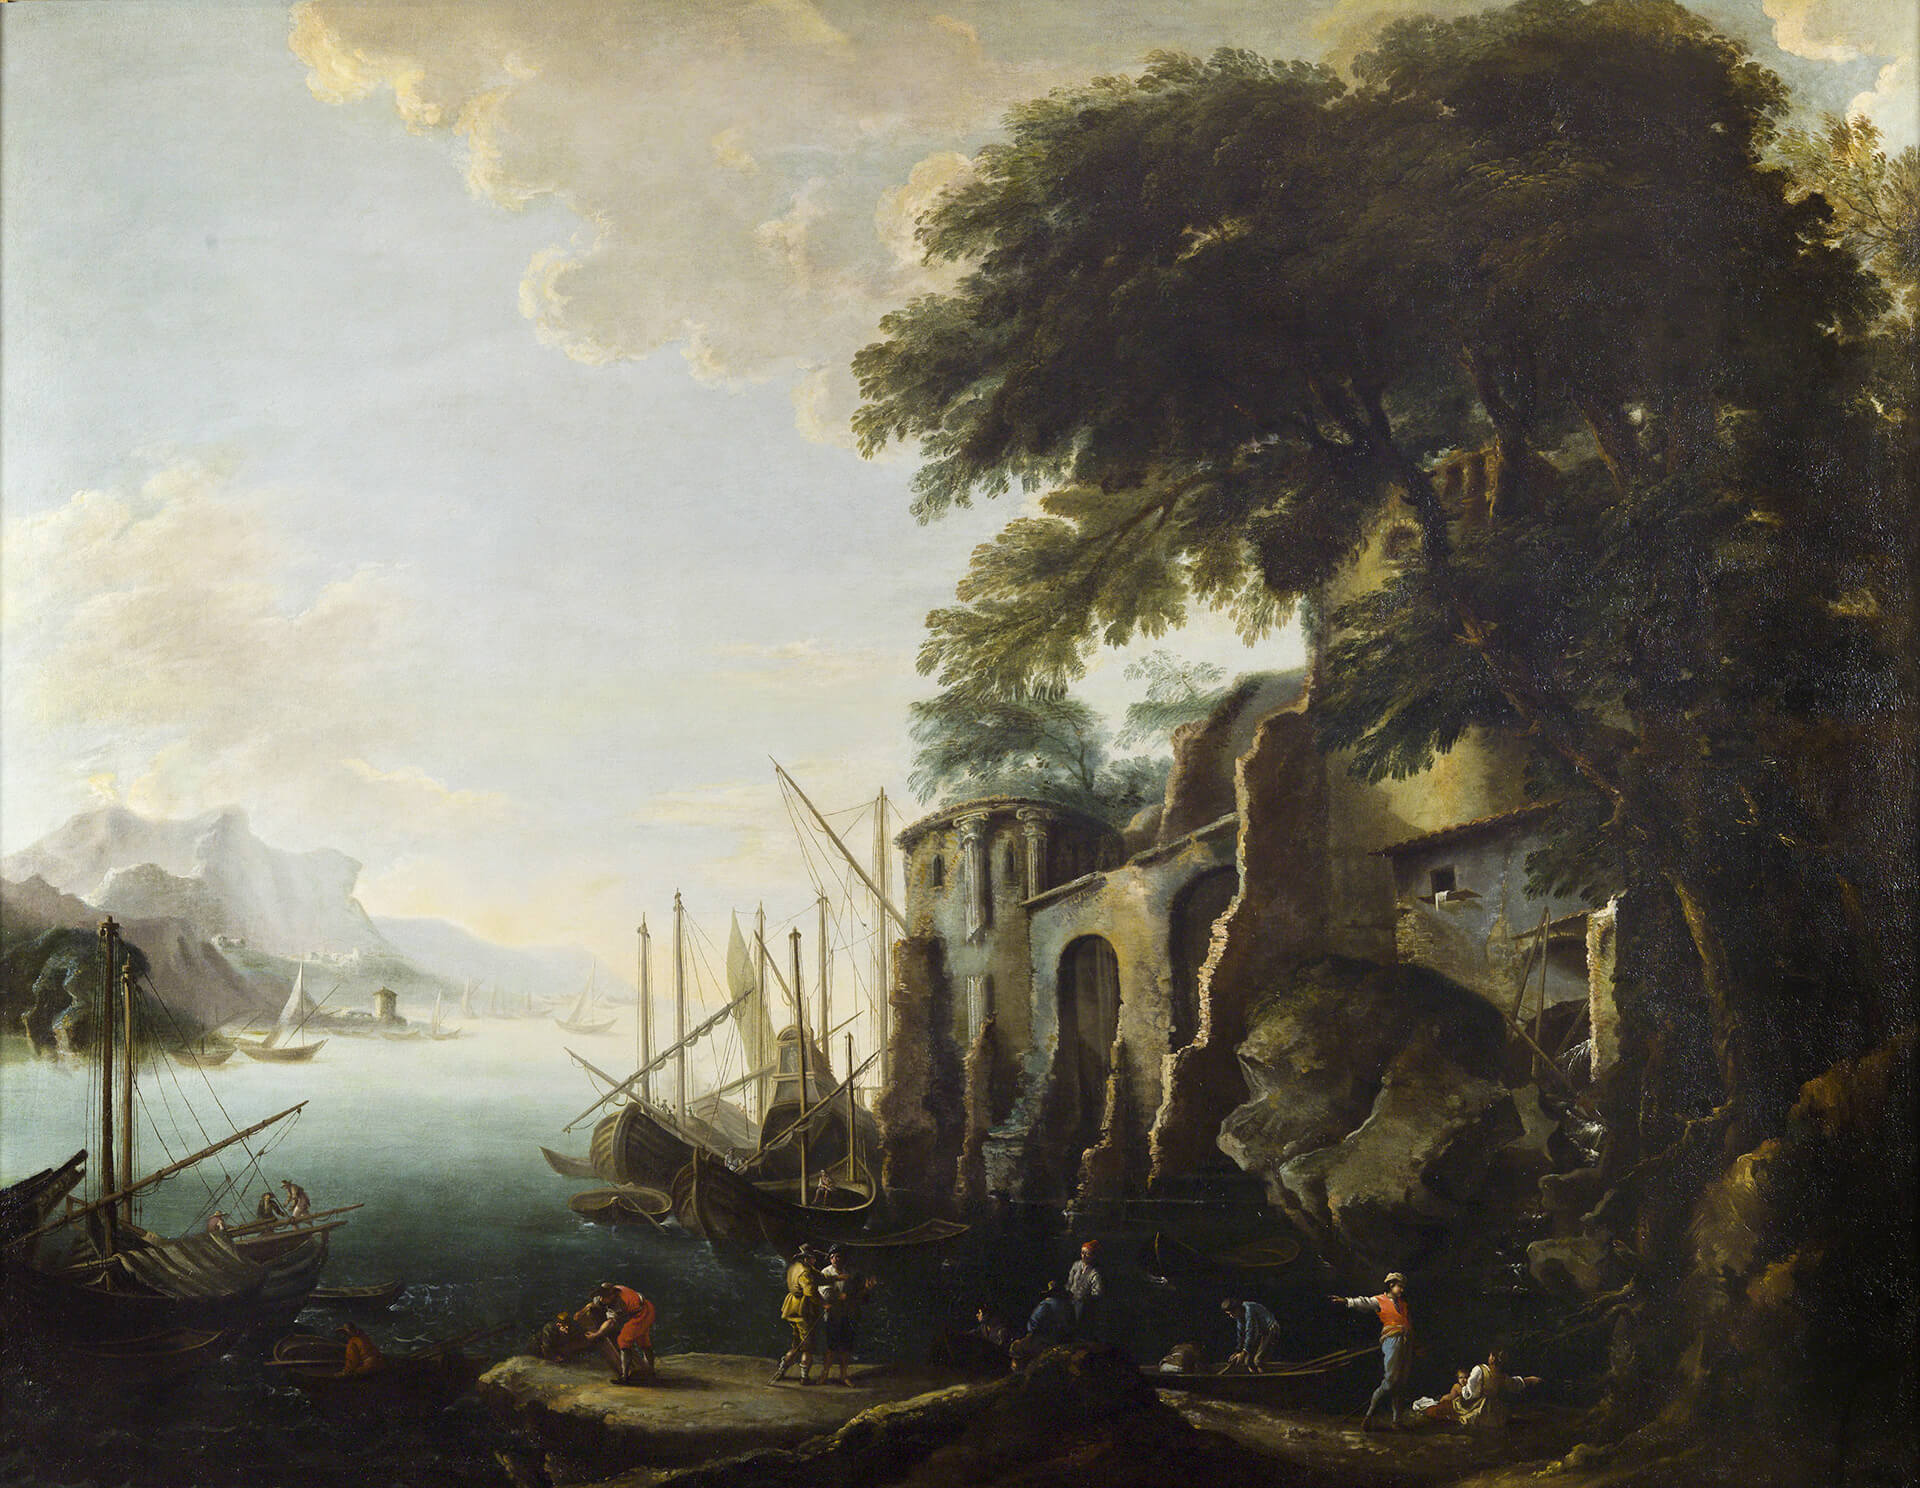 Landscape with ships and fishermen